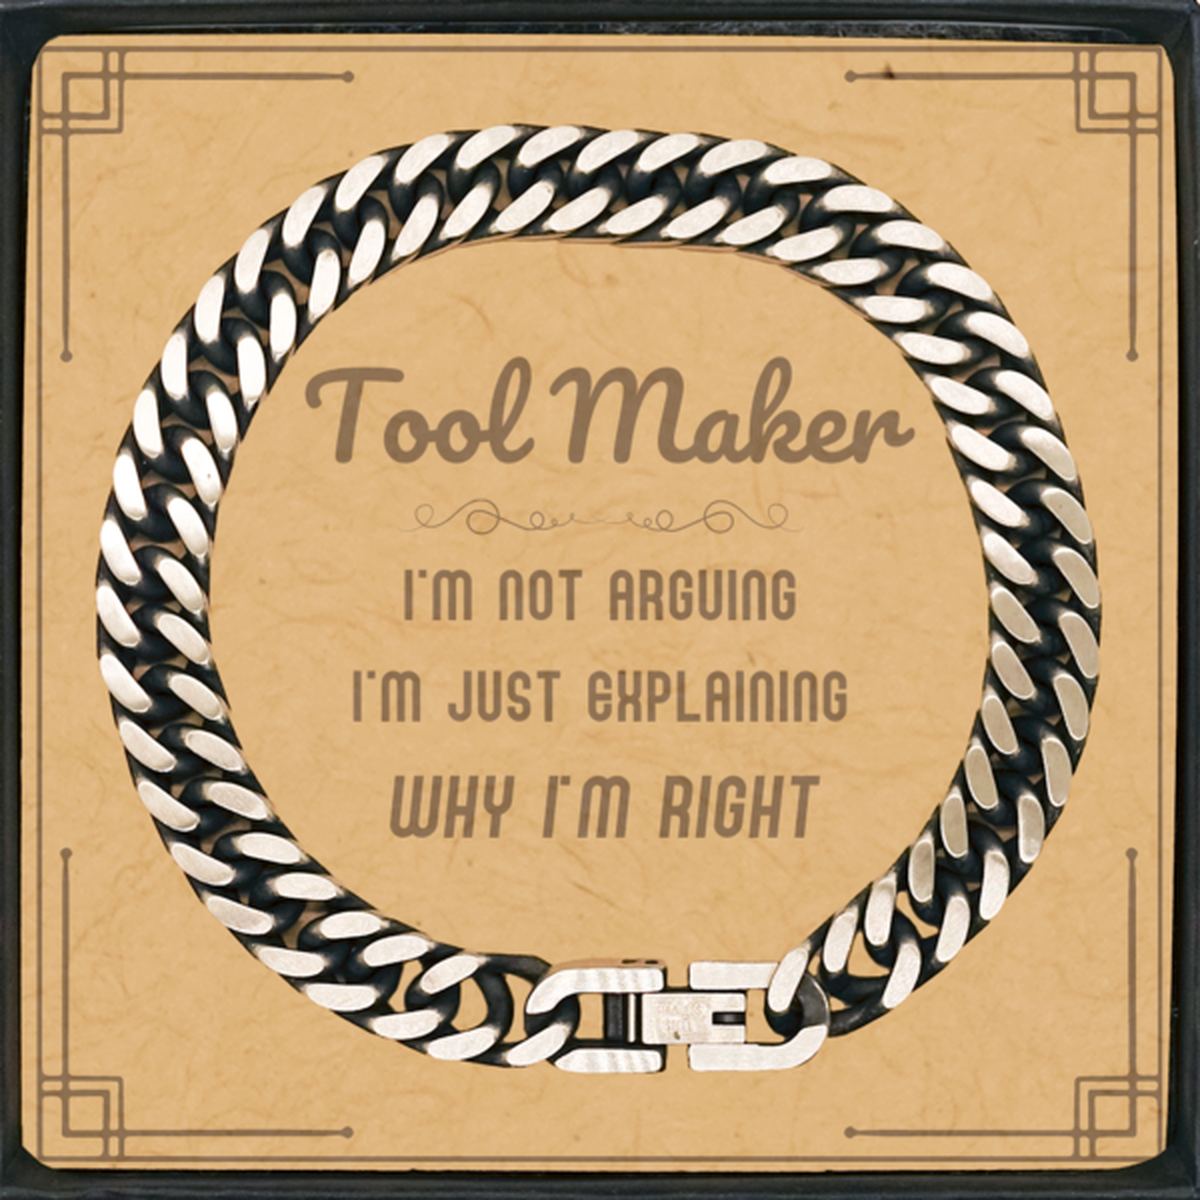 Tool Maker I'm not Arguing. I'm Just Explaining Why I'm RIGHT Cuban Link Chain Bracelet, Funny Saying Quote Tool Maker Gifts For Tool Maker Message Card Graduation Birthday Christmas Gifts for Men Women Coworker